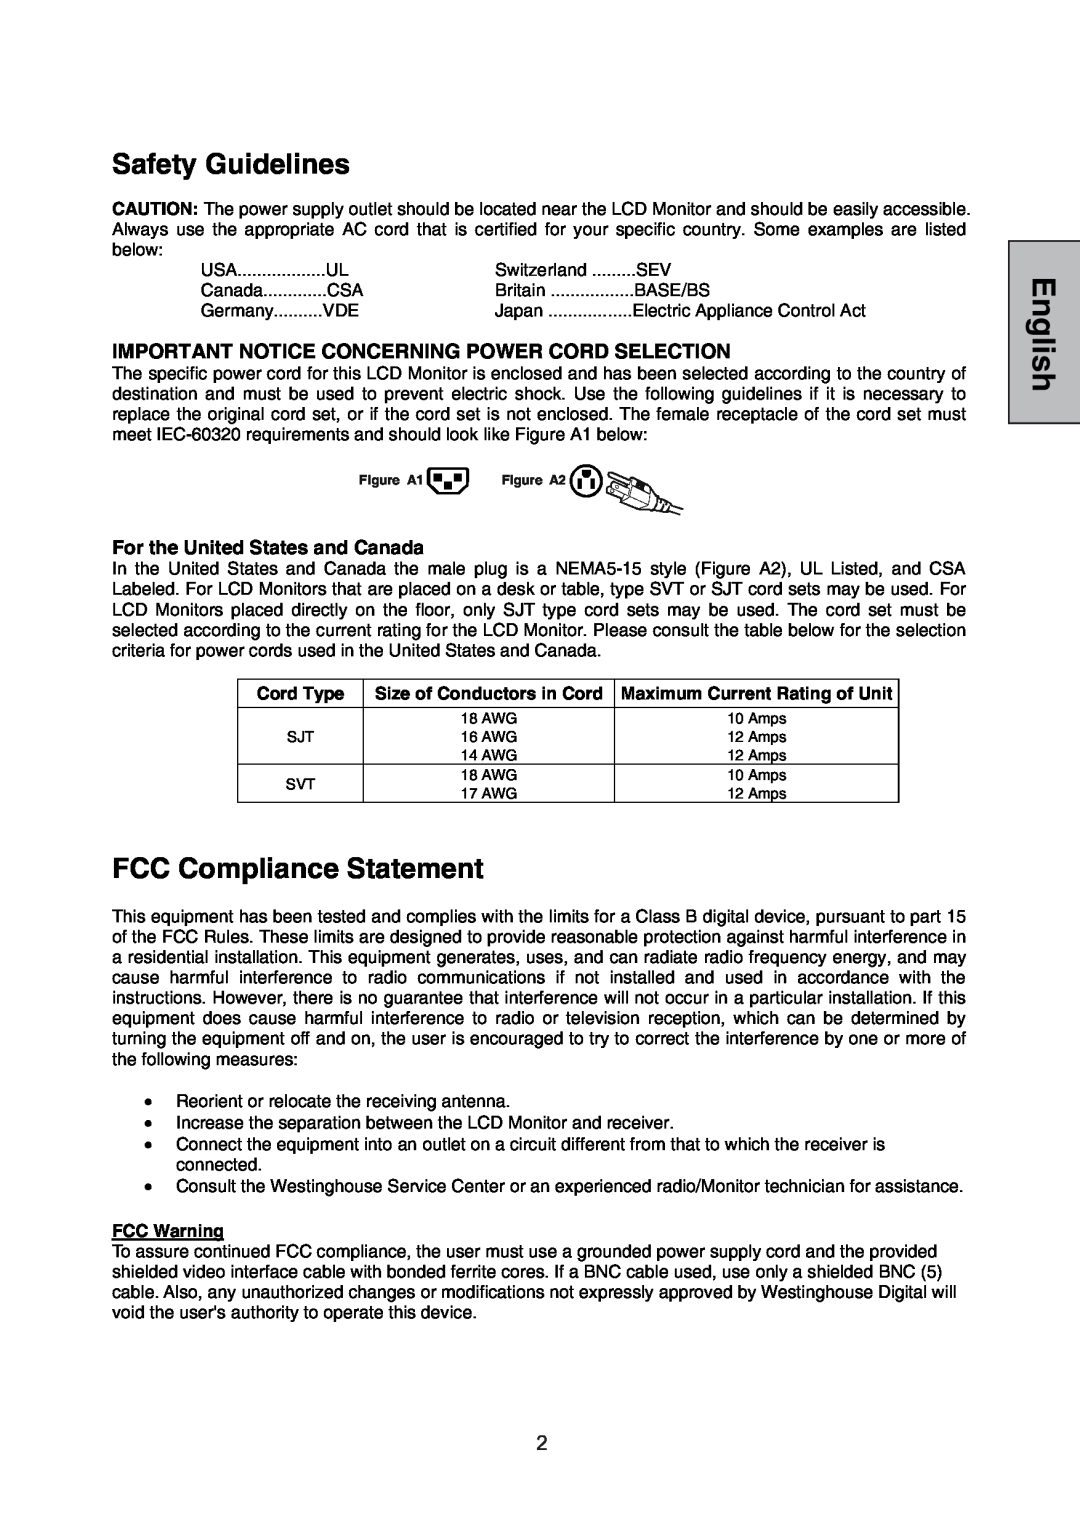 Westinghouse L1928NV manual Safety Guidelines, FCC Compliance Statement, Important Notice Concerning Power Cord Selection 